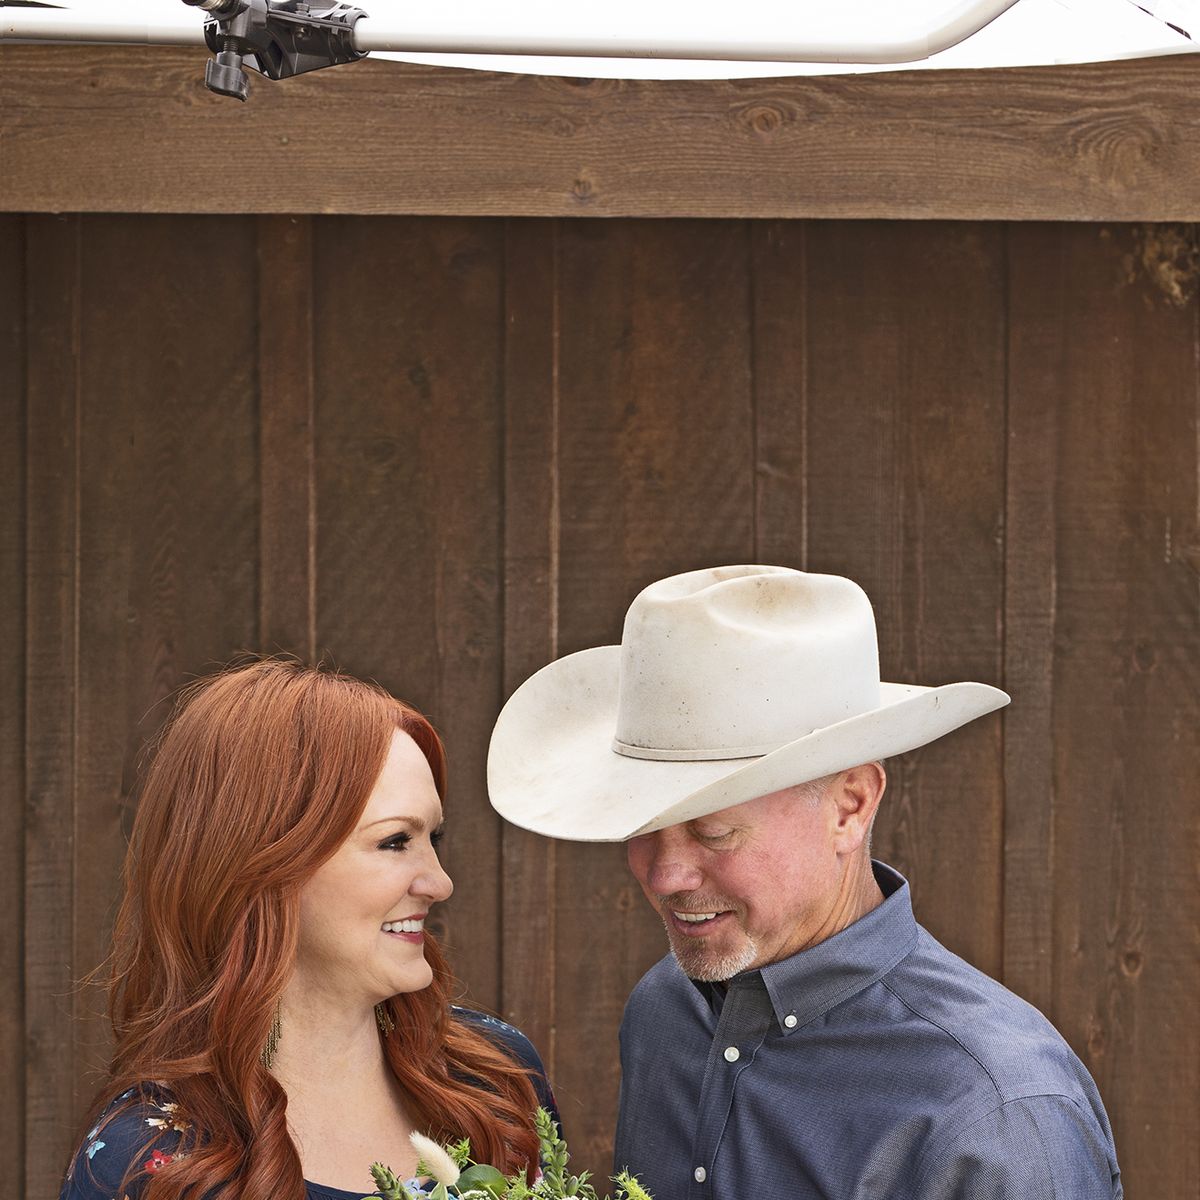 The Pioneer Woman': How Tall Is Ree Drummond?